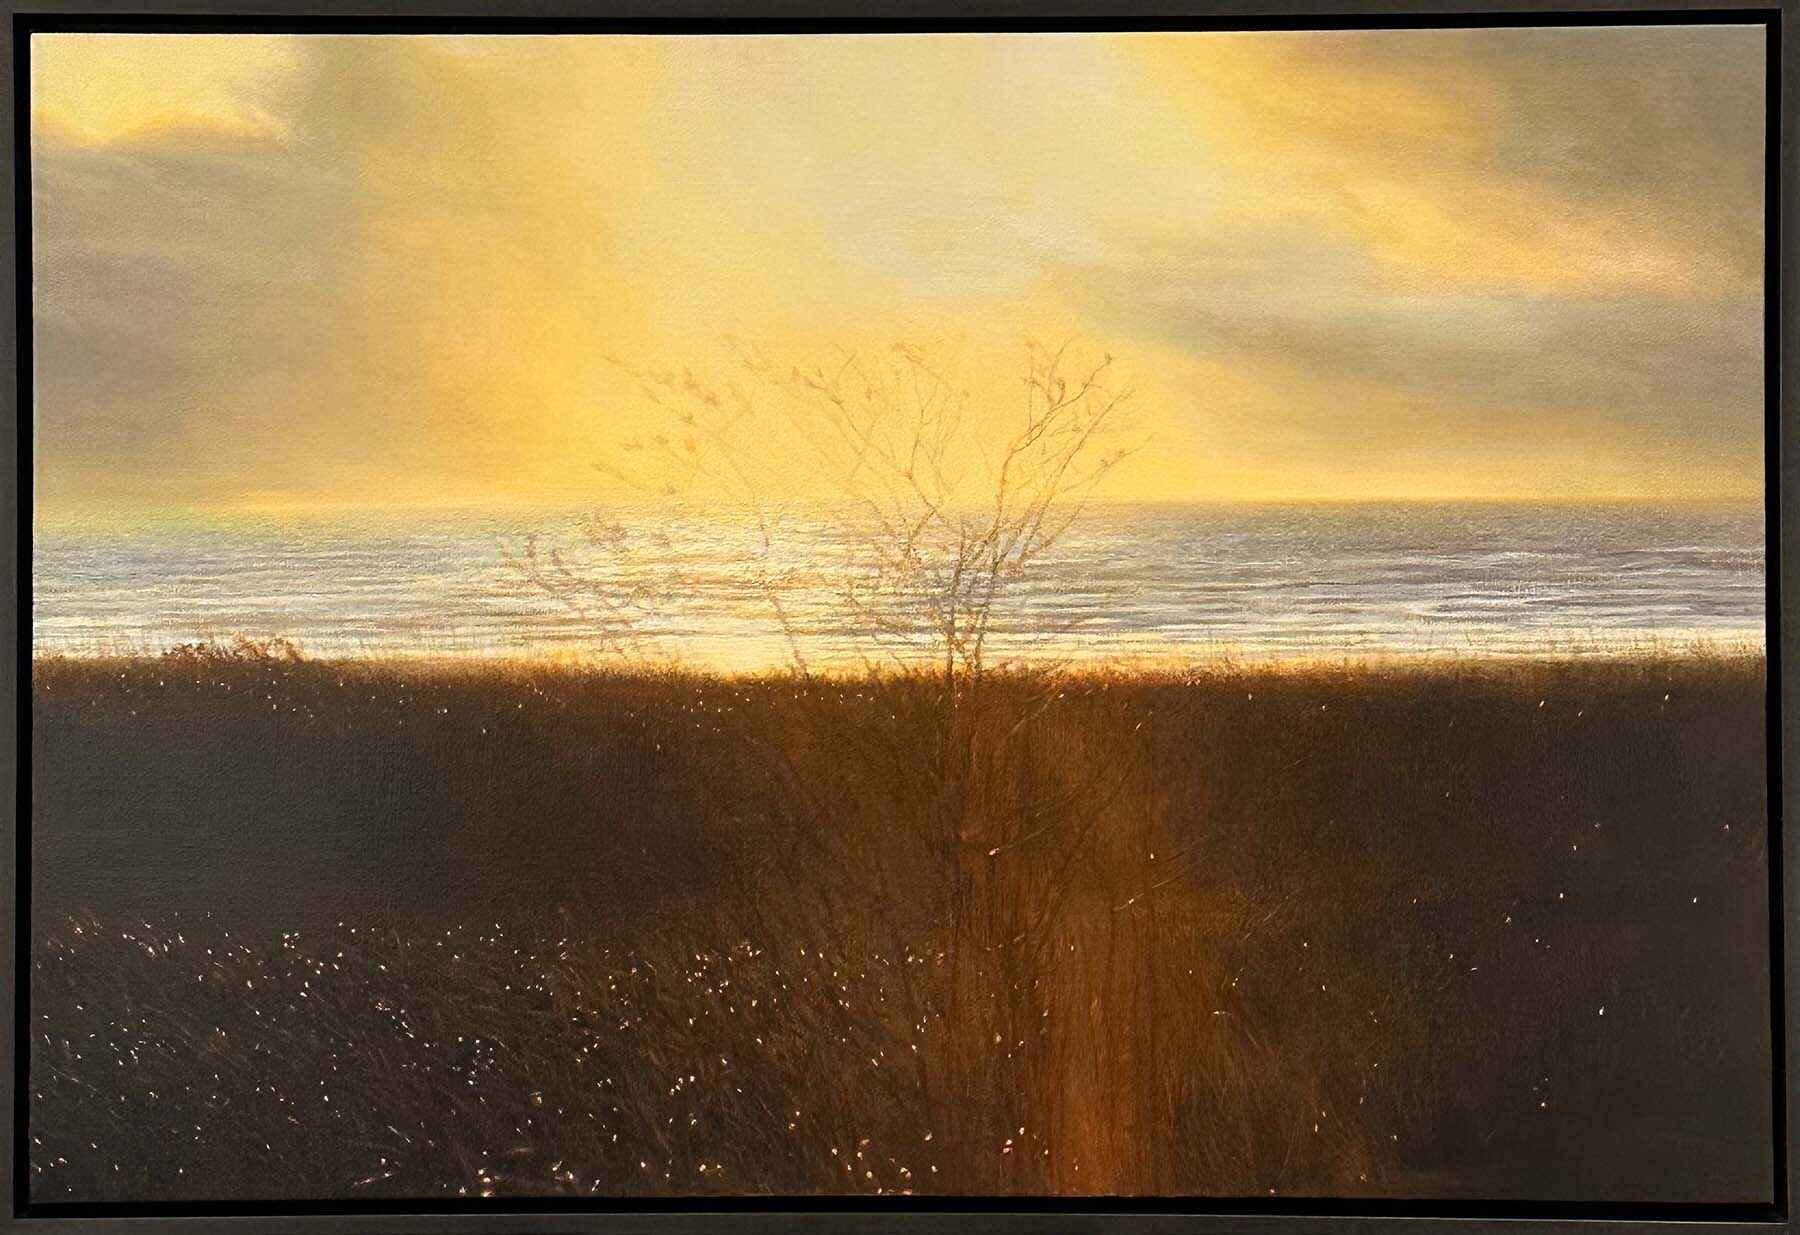 Contemporary art. Title: Autumn Day, Oil on Canvas-27x40 in by Canadian artist Paul Chizik.